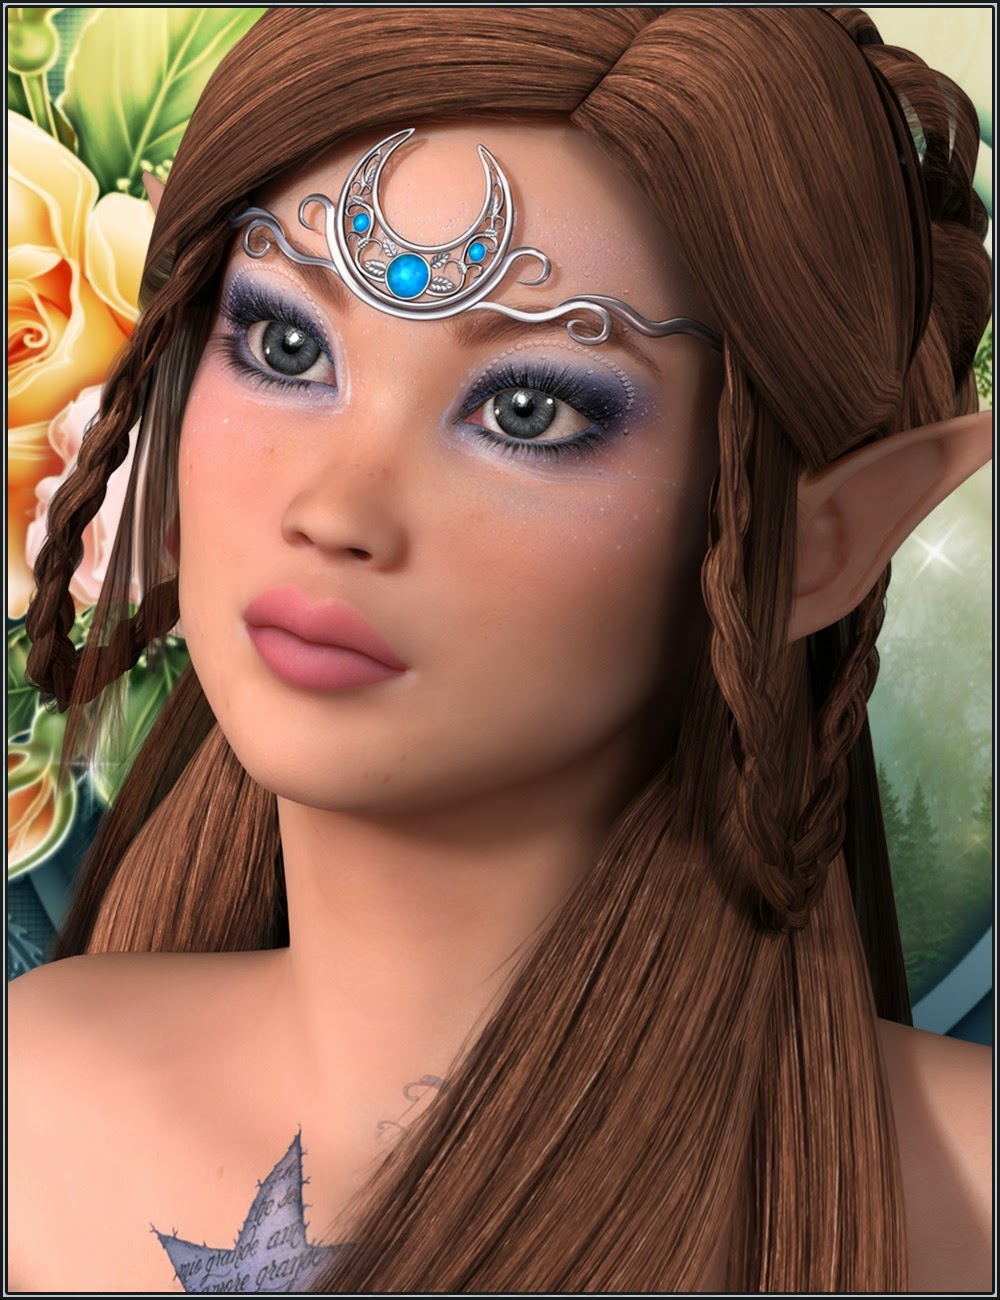 Download DAZ Studio 3 for FREE!: DAZ 3D - Mystic Circlets For Any Figure